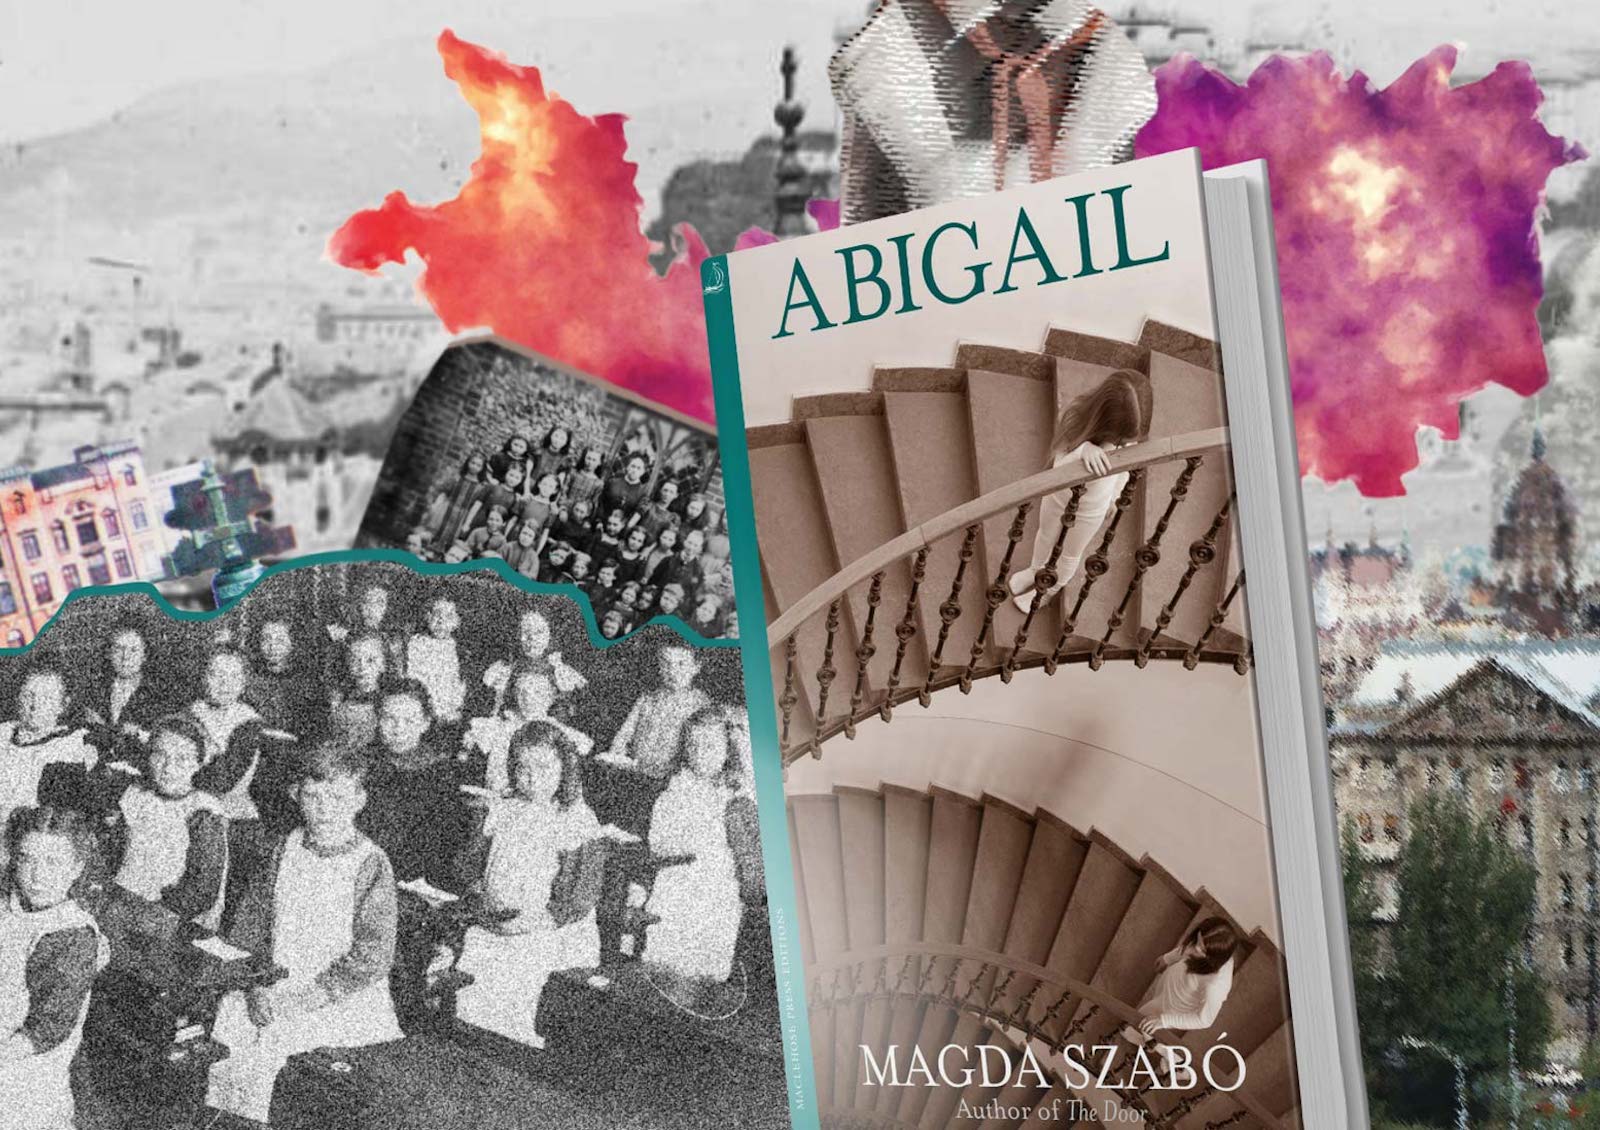 Magda Szabó’s cult novel Abigail is an adventurous tale of teenage friendship in wartime Hungary 